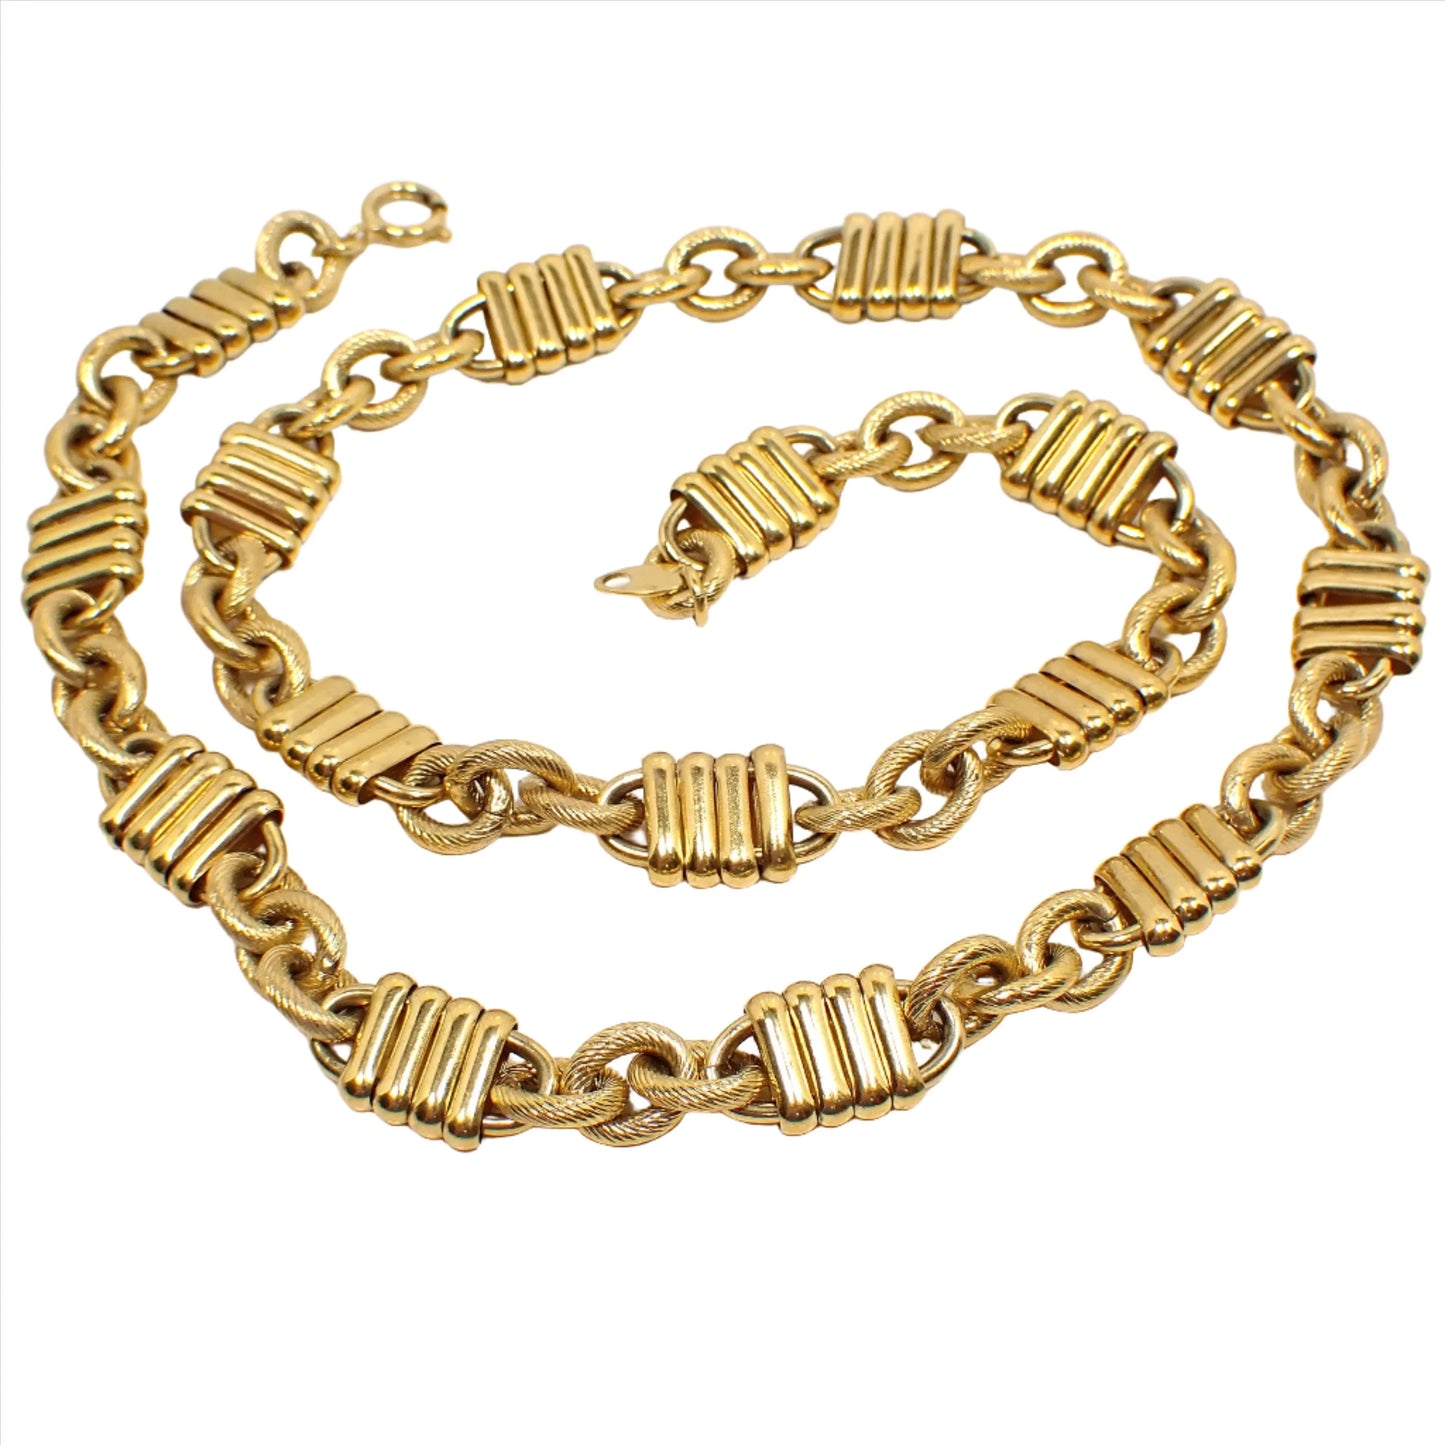 Top view of the retro vintage Trifari fancy link chain necklace. The metal is gold tone plated in color. There is a spring ring clasp at the end. The necklace has a repeating pattern of three textured oval cable links and then a link that is long with four oval bar link links over open links that stick out on each end. 